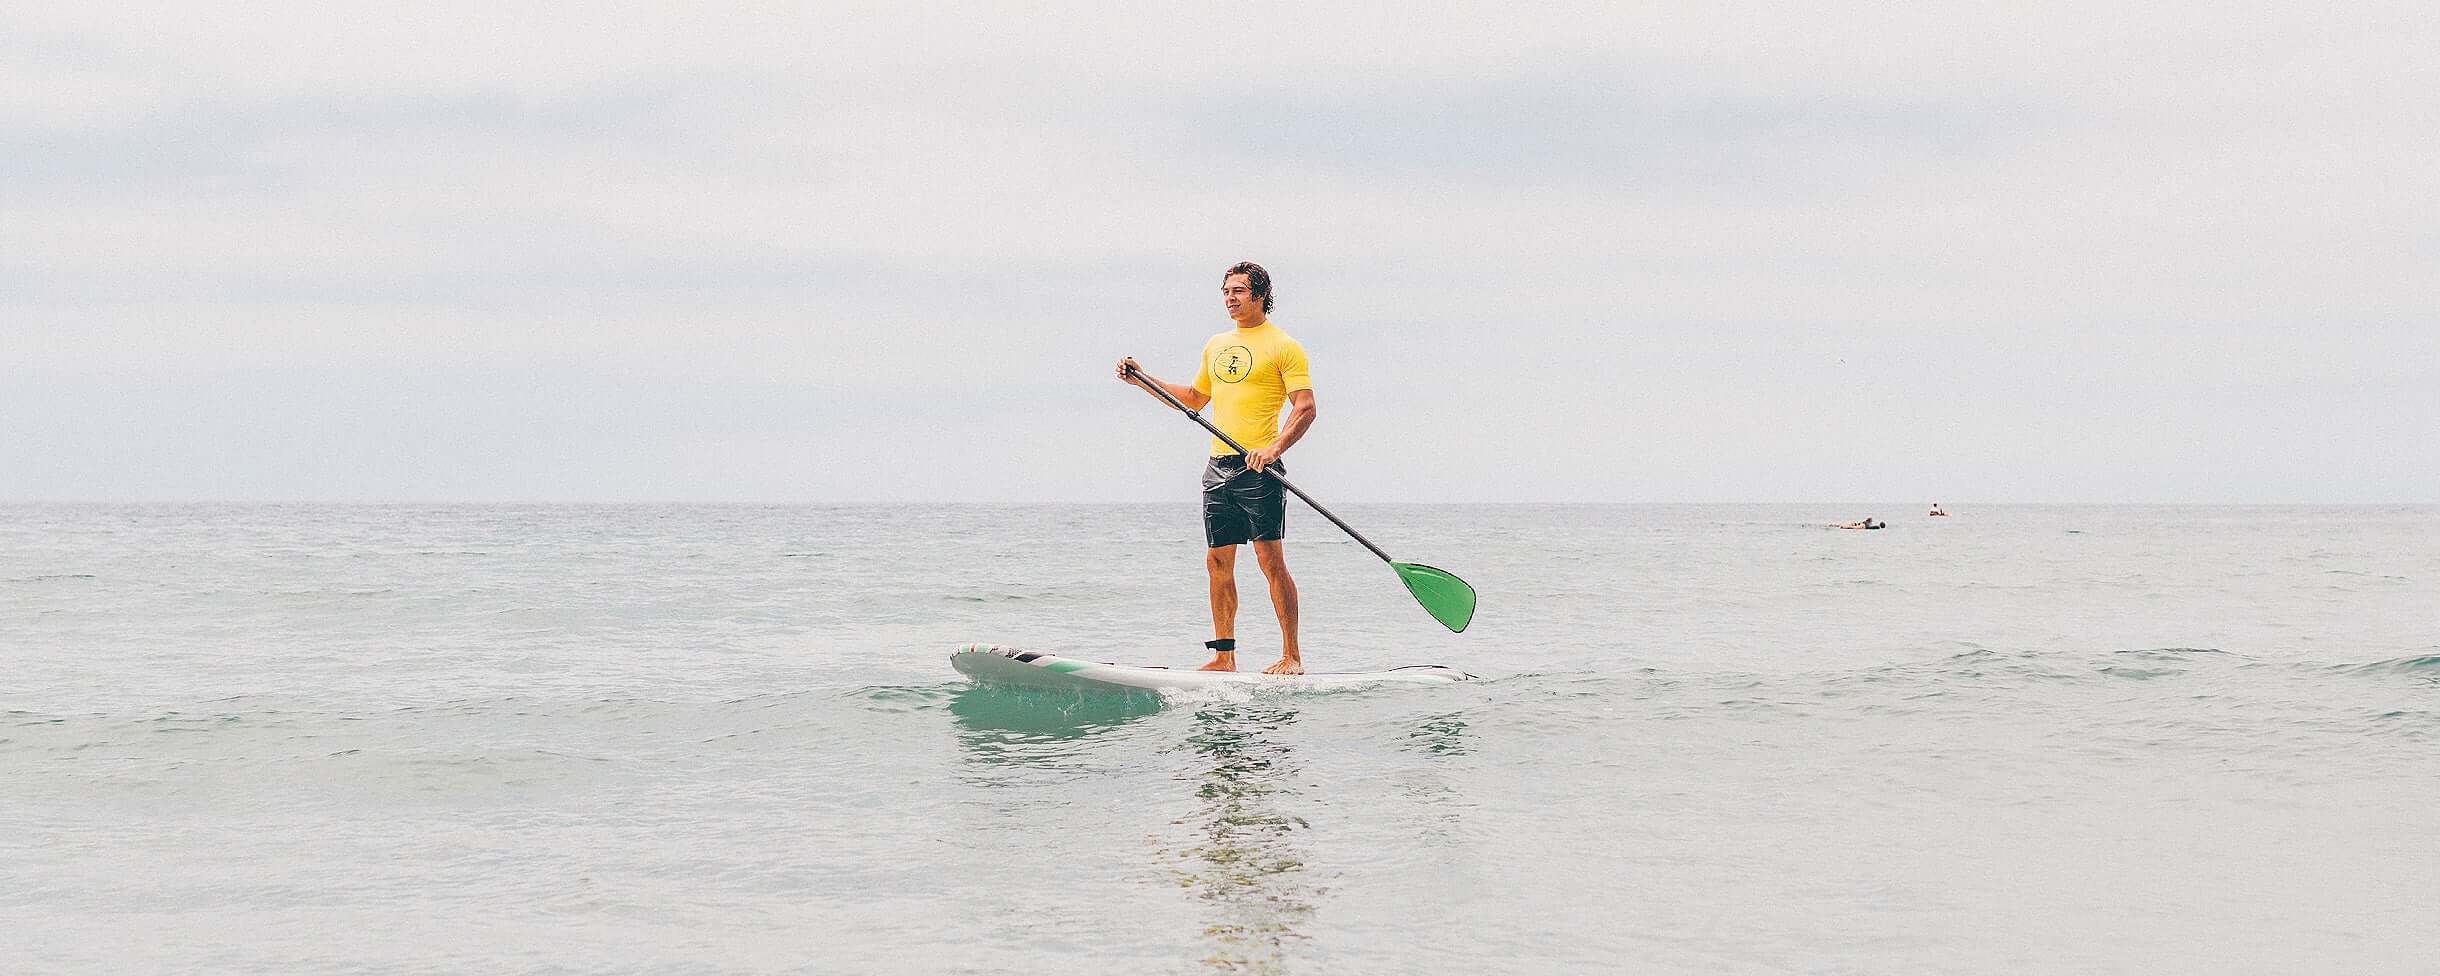 Rentals - Stand-up Paddle Board Rentals. Everyday California offers paddleboard rentals and lessons in La Jolla, California